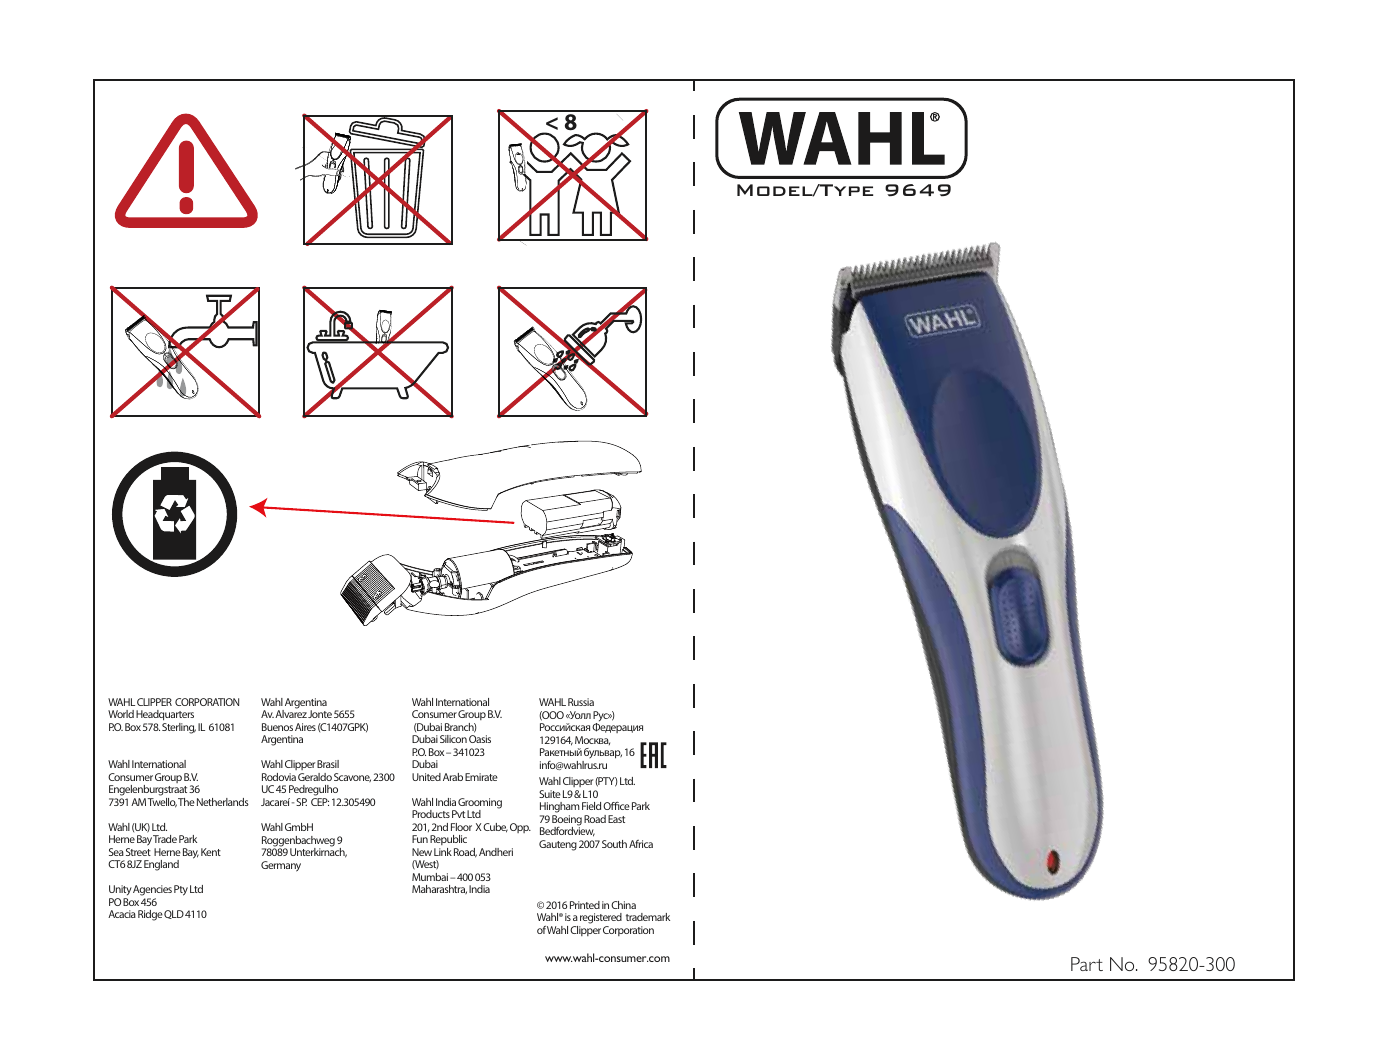 wahl model 9649 replacement head